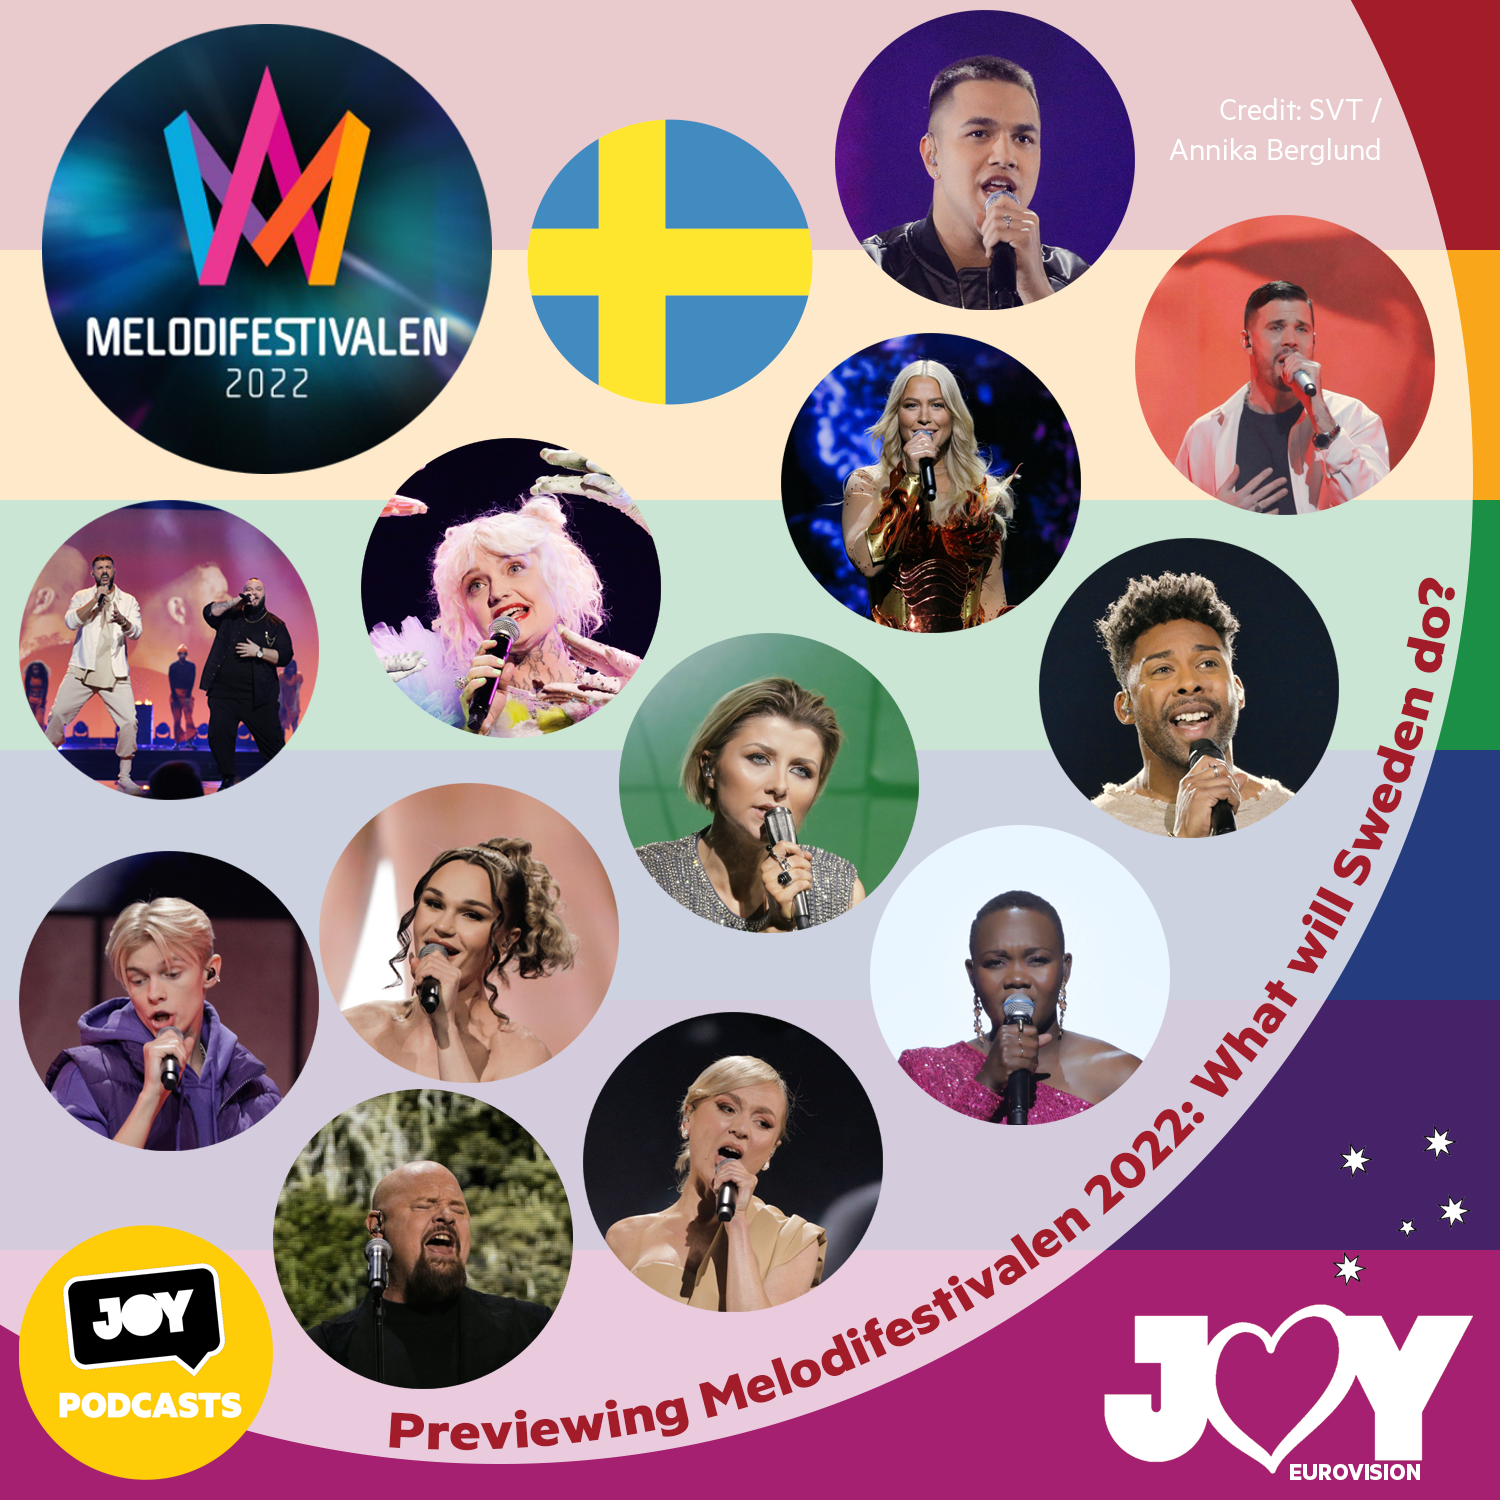 🇸🇪 Previewing Melodifestivalen 2022: What will Sweden do?